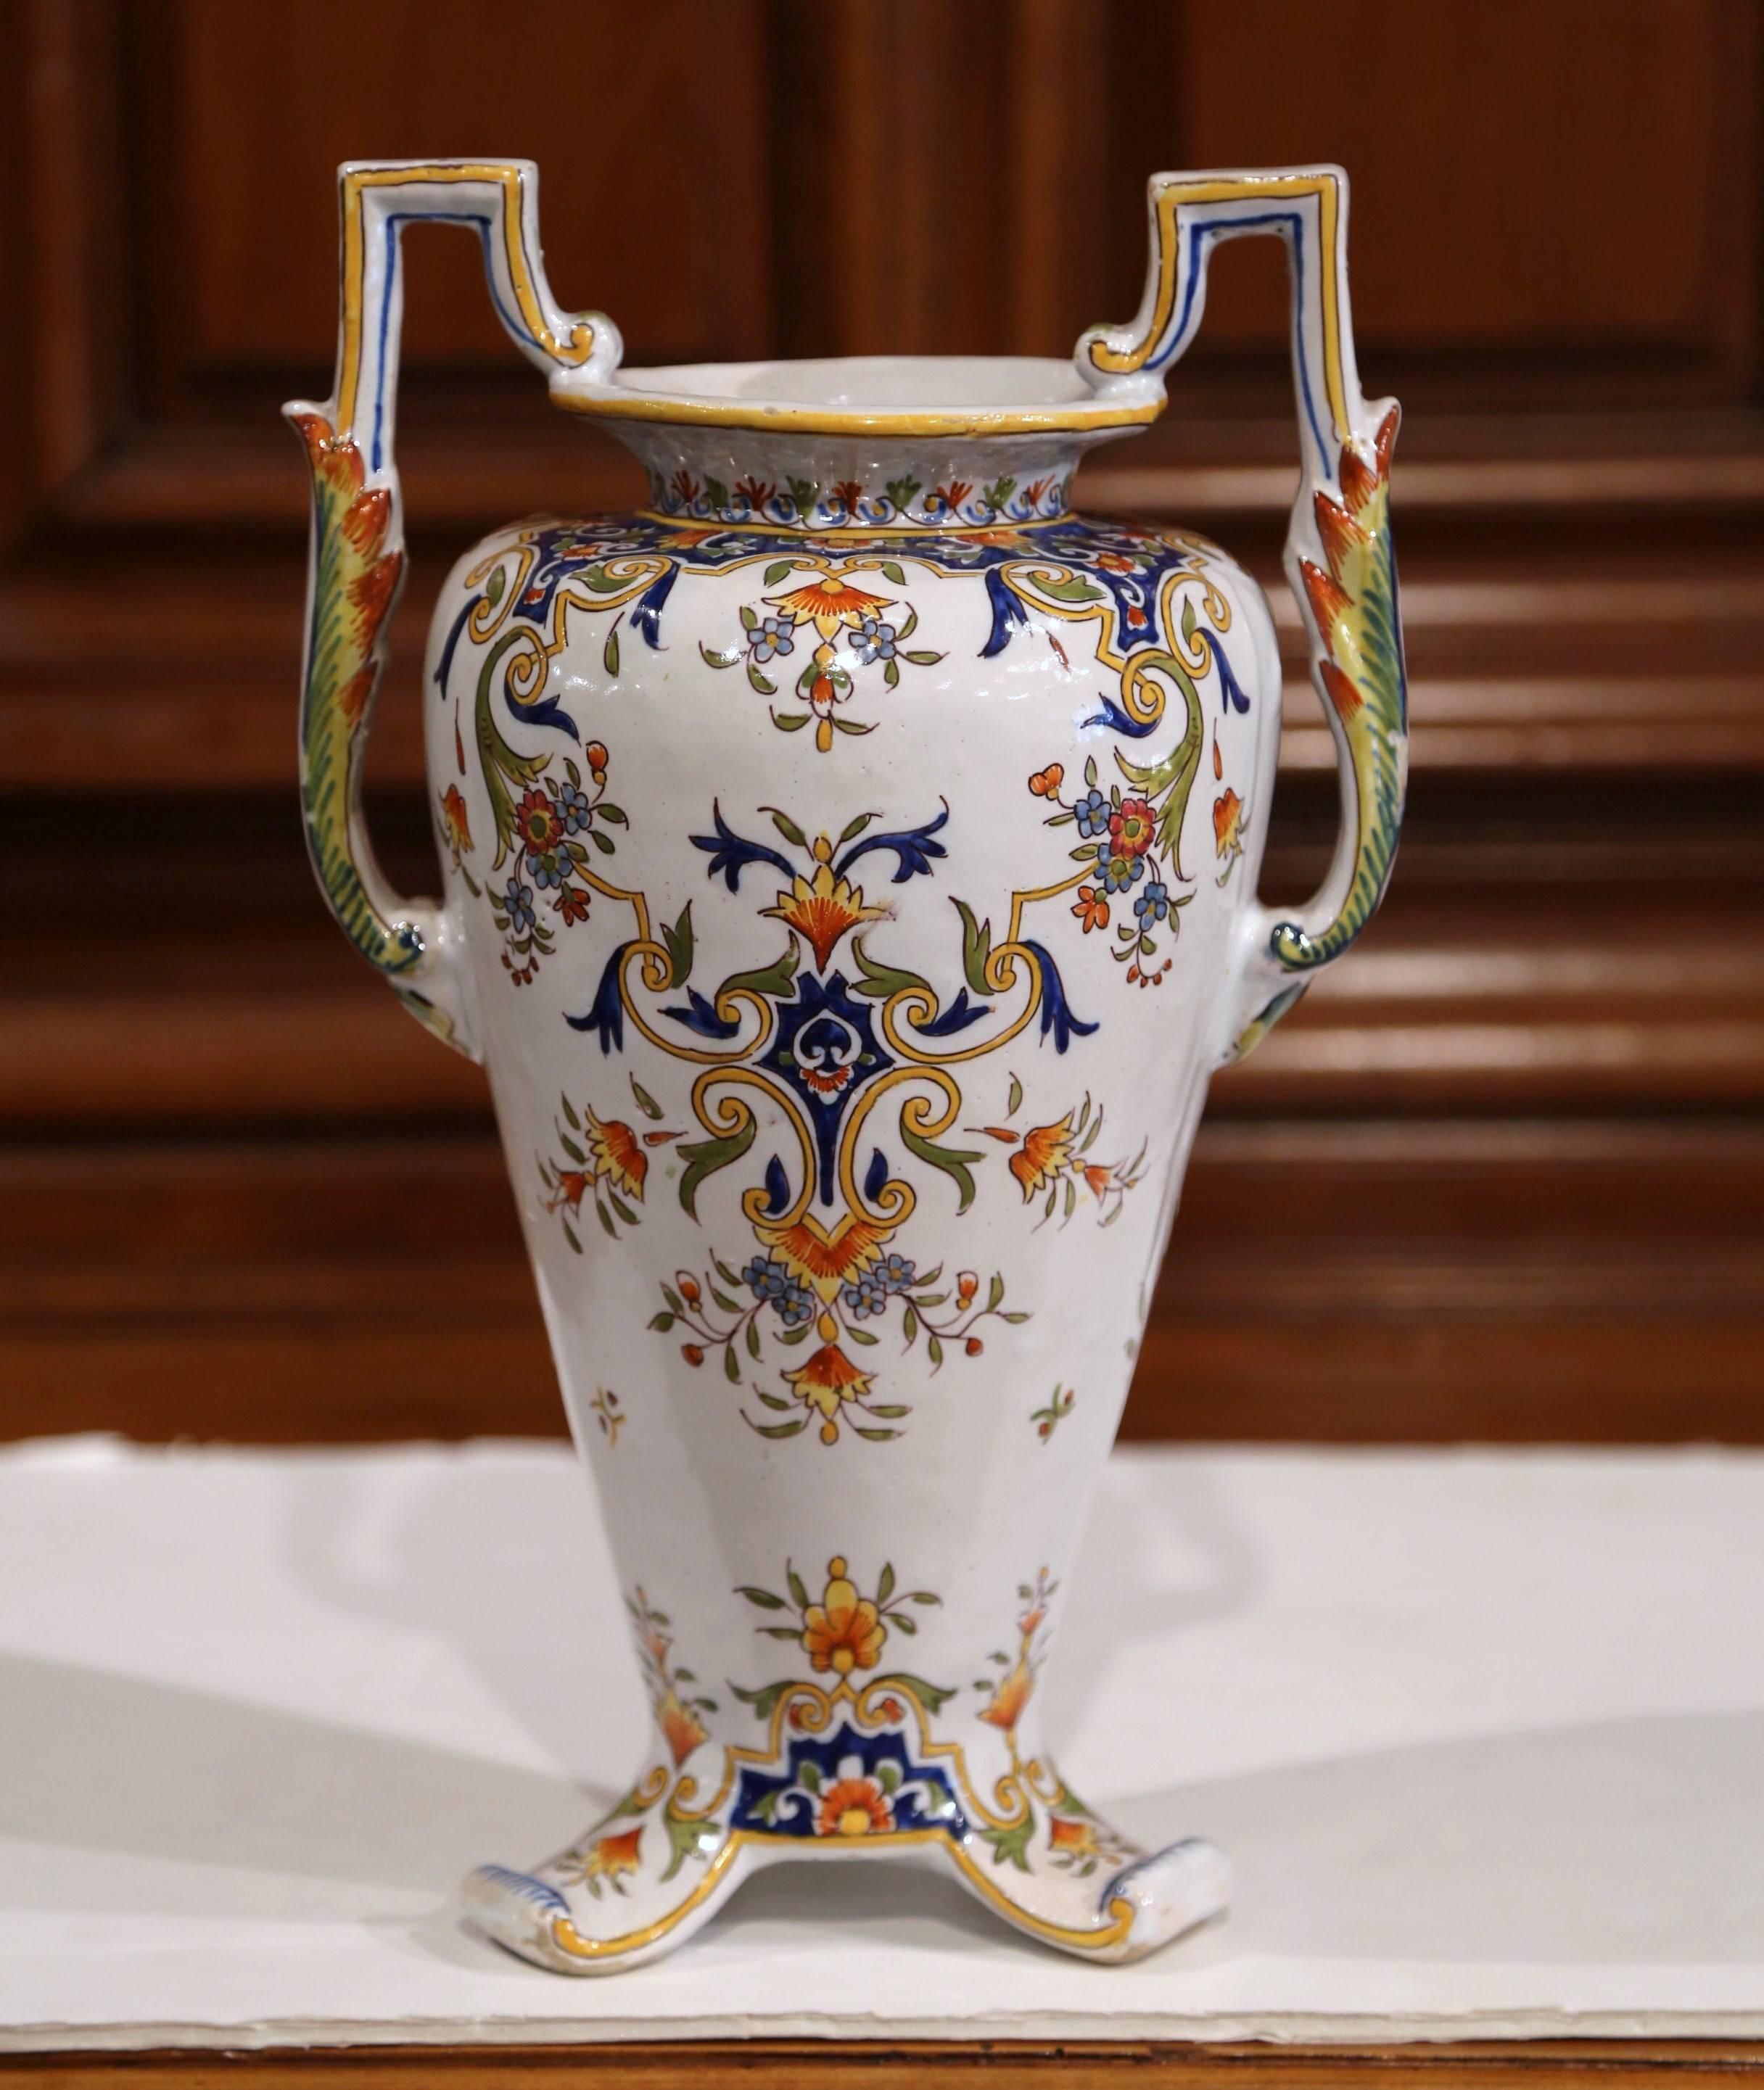 Make a statement of beauty with this elegant, antique vase. Crafted in Normandy, France, circa 1870, the vase is a true piece of art with a sculptural shape and details. Sited on three small feet, the colorful flower vase has artful handles on each